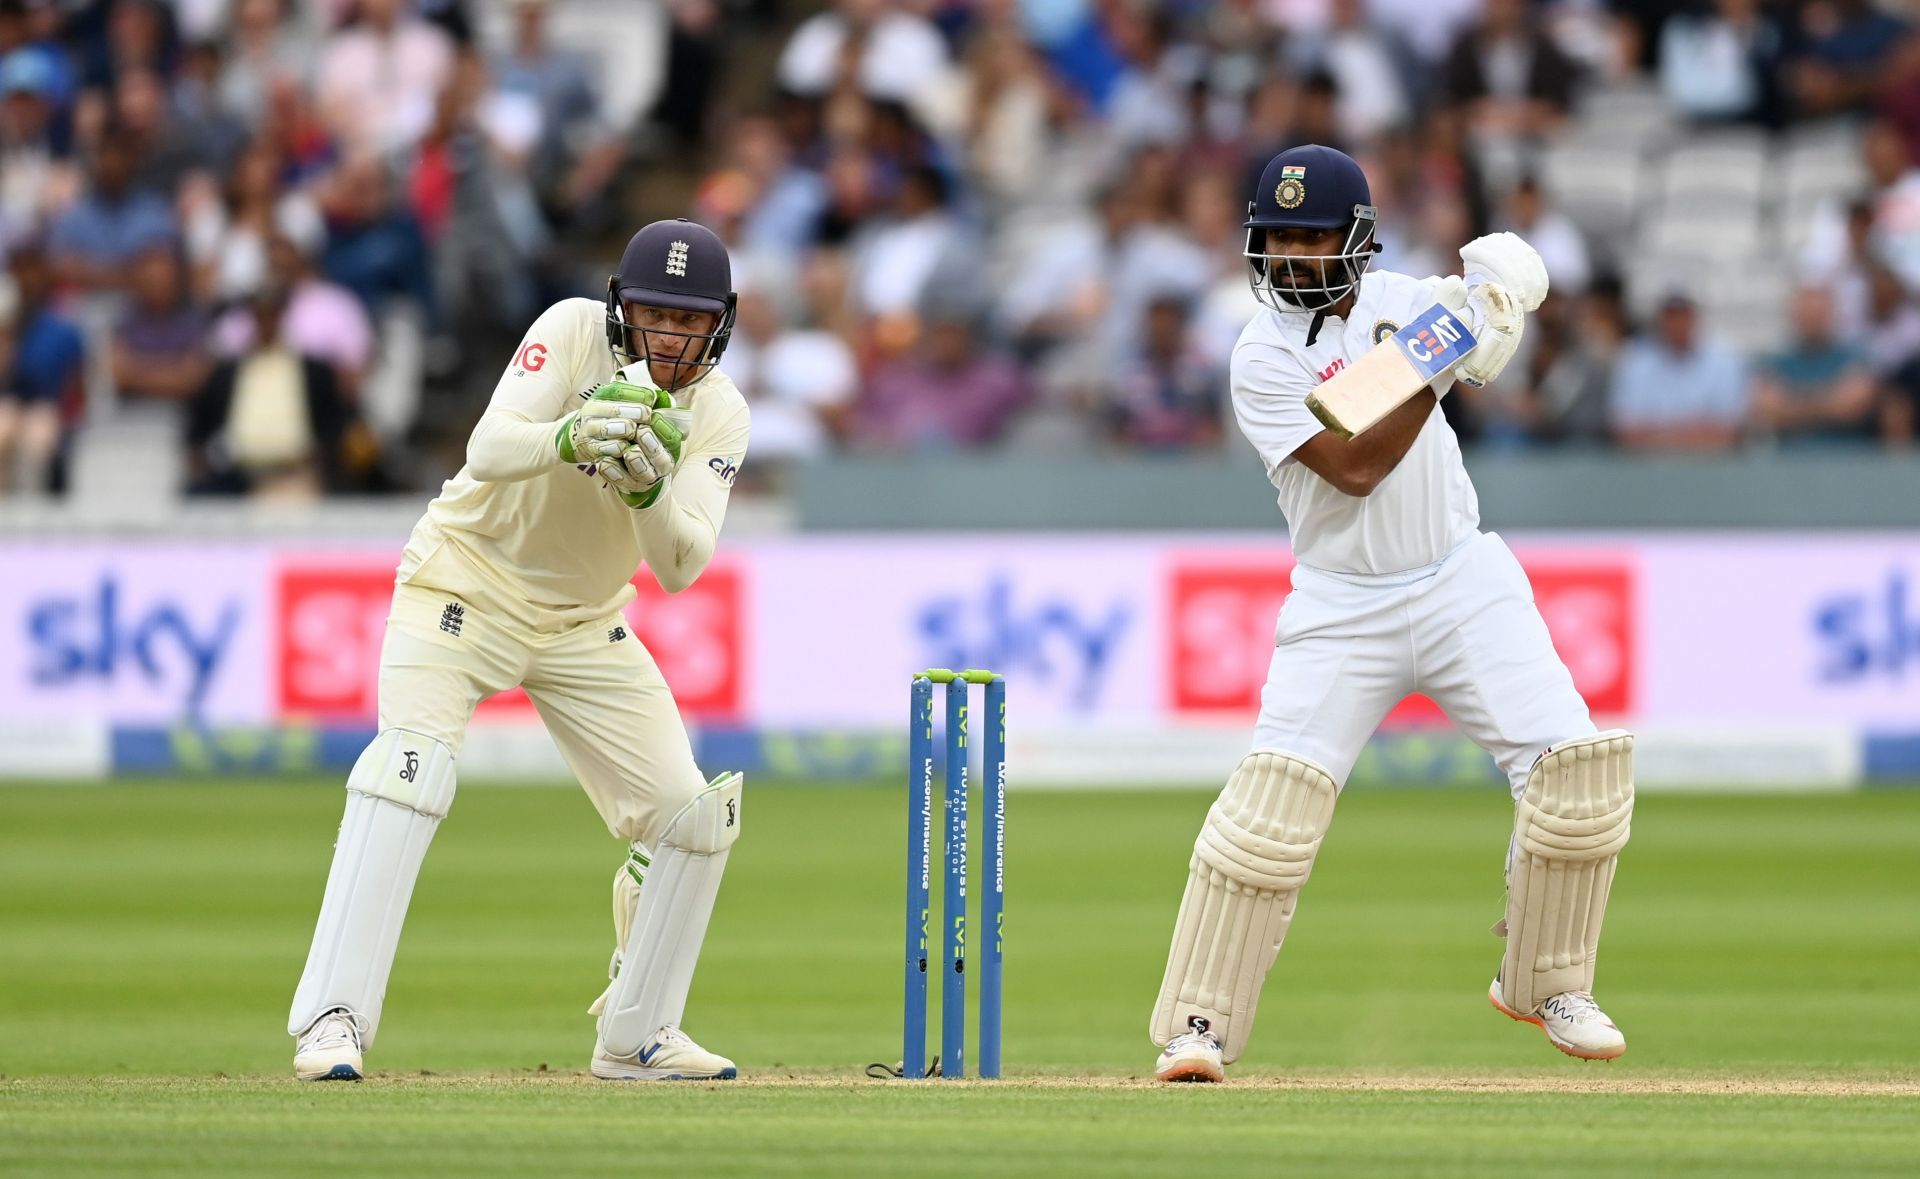 Ajinkya Rahane was in dismal form for India in the Test series against England home and away this year.